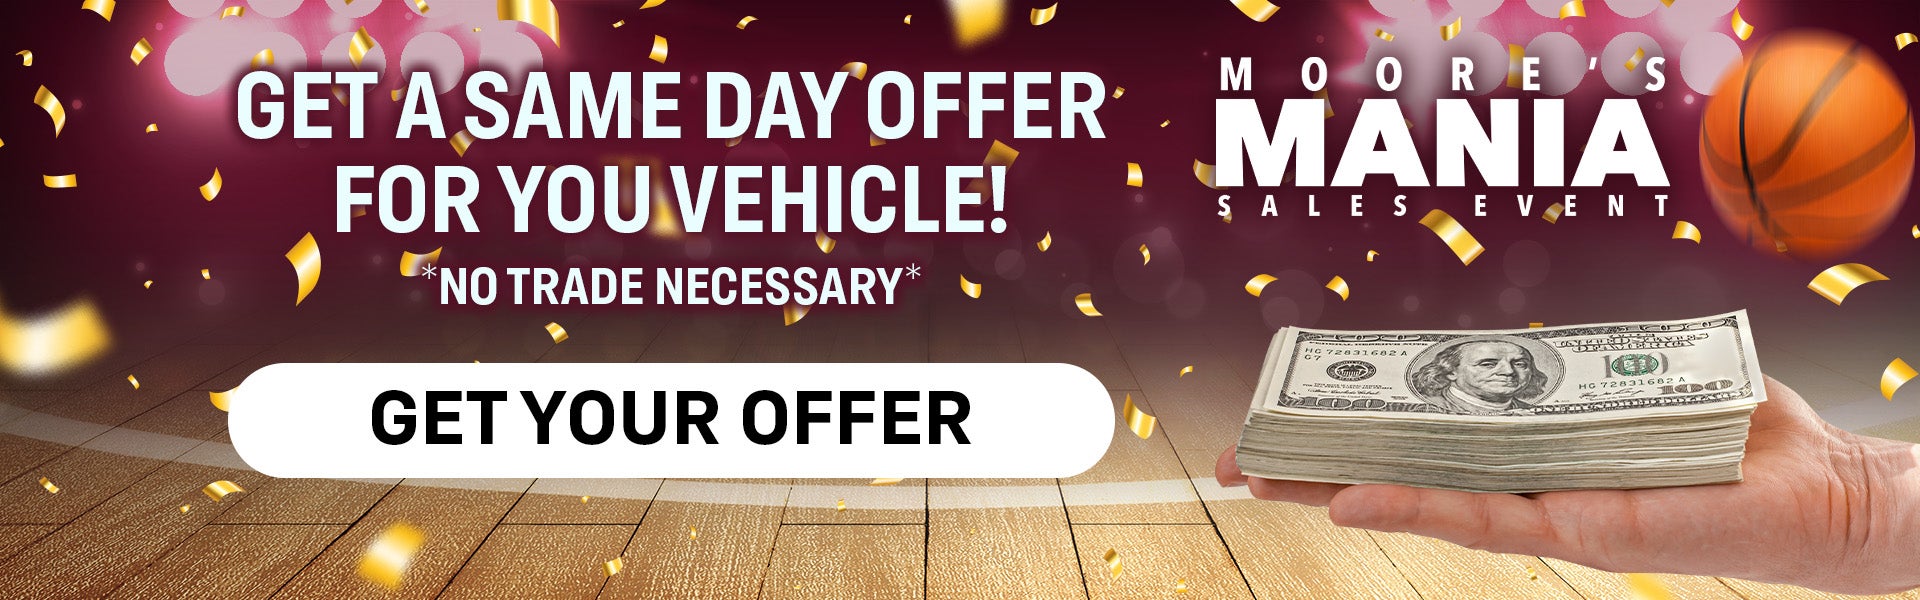 Get a Same Day Offer for you vehicle!